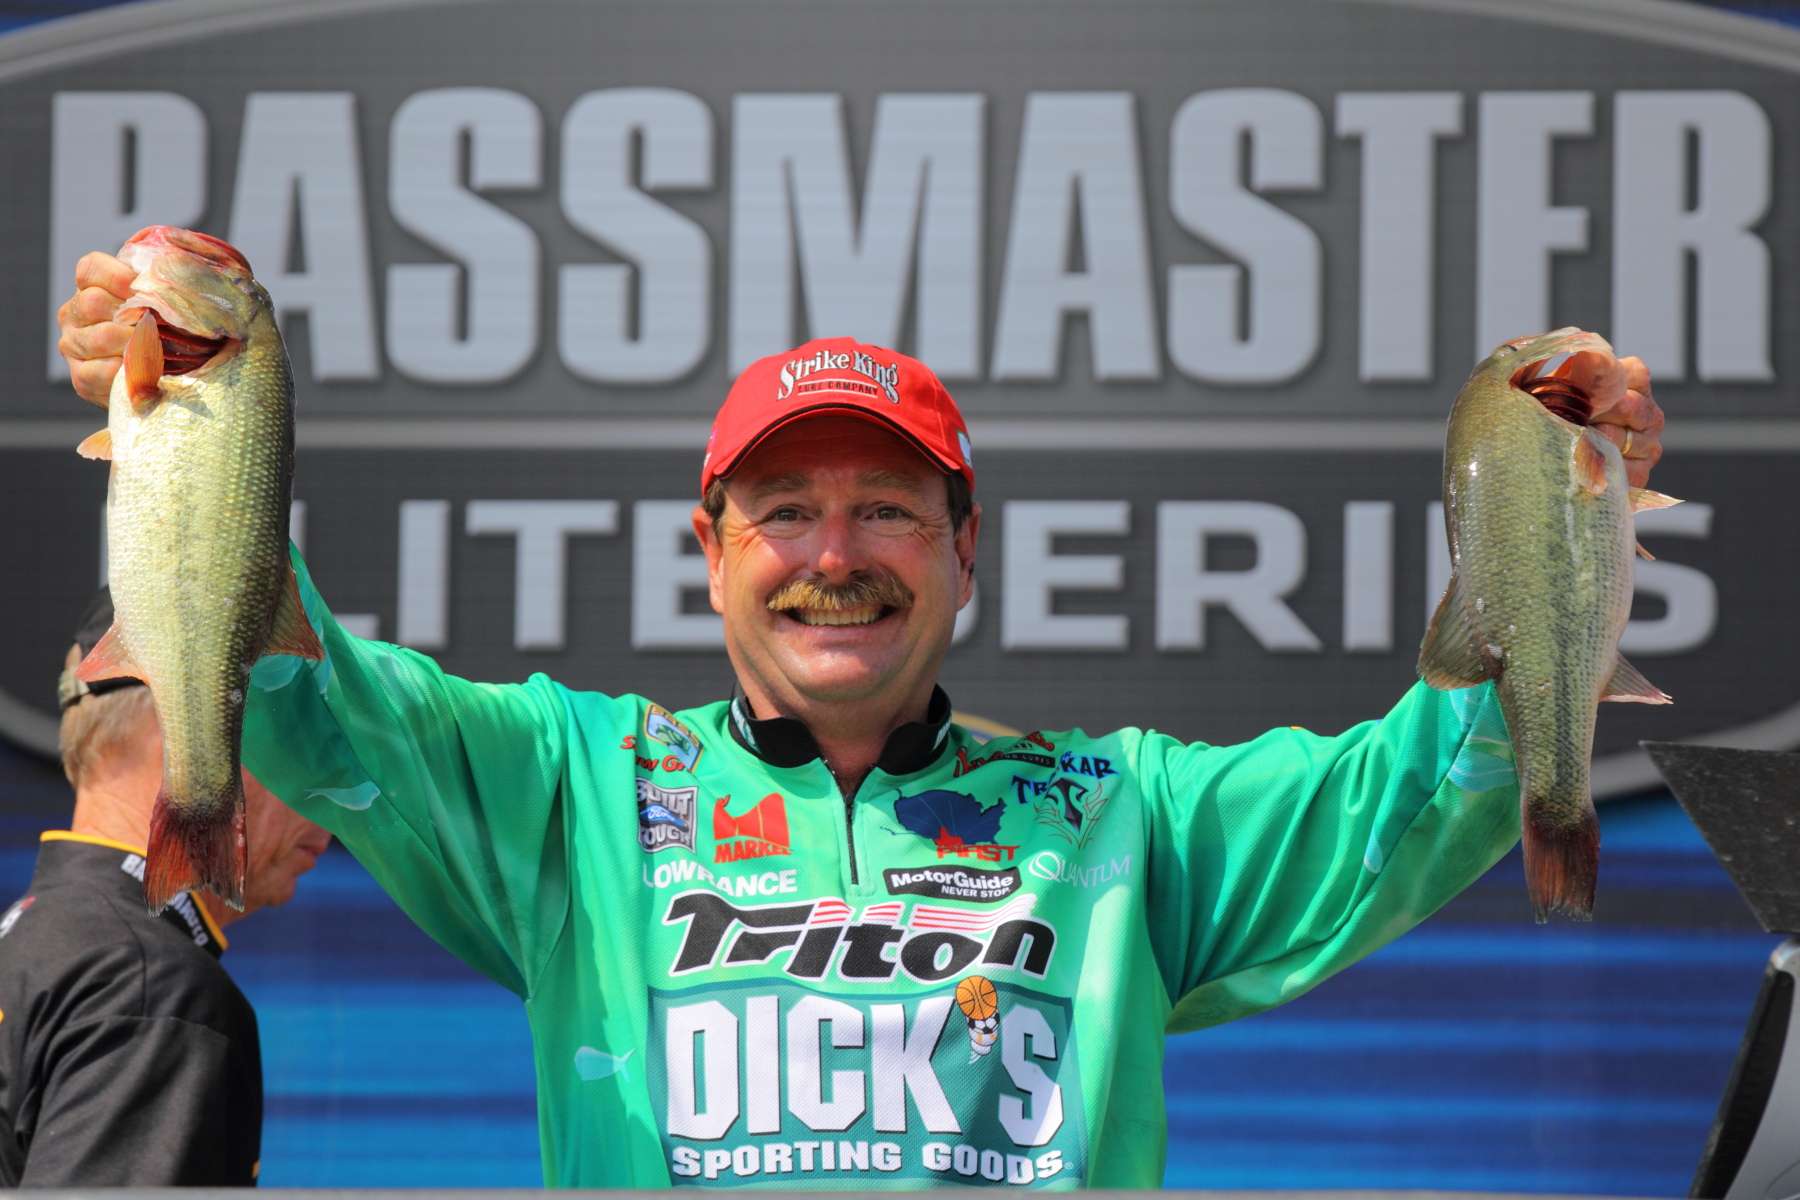 Shaw Grigsby secured his only Bassmaster Elite Series win here when the pros came to the Harris Chain in March of 2011. His total weight for the tournament was 75 pounds, 4 ounces.